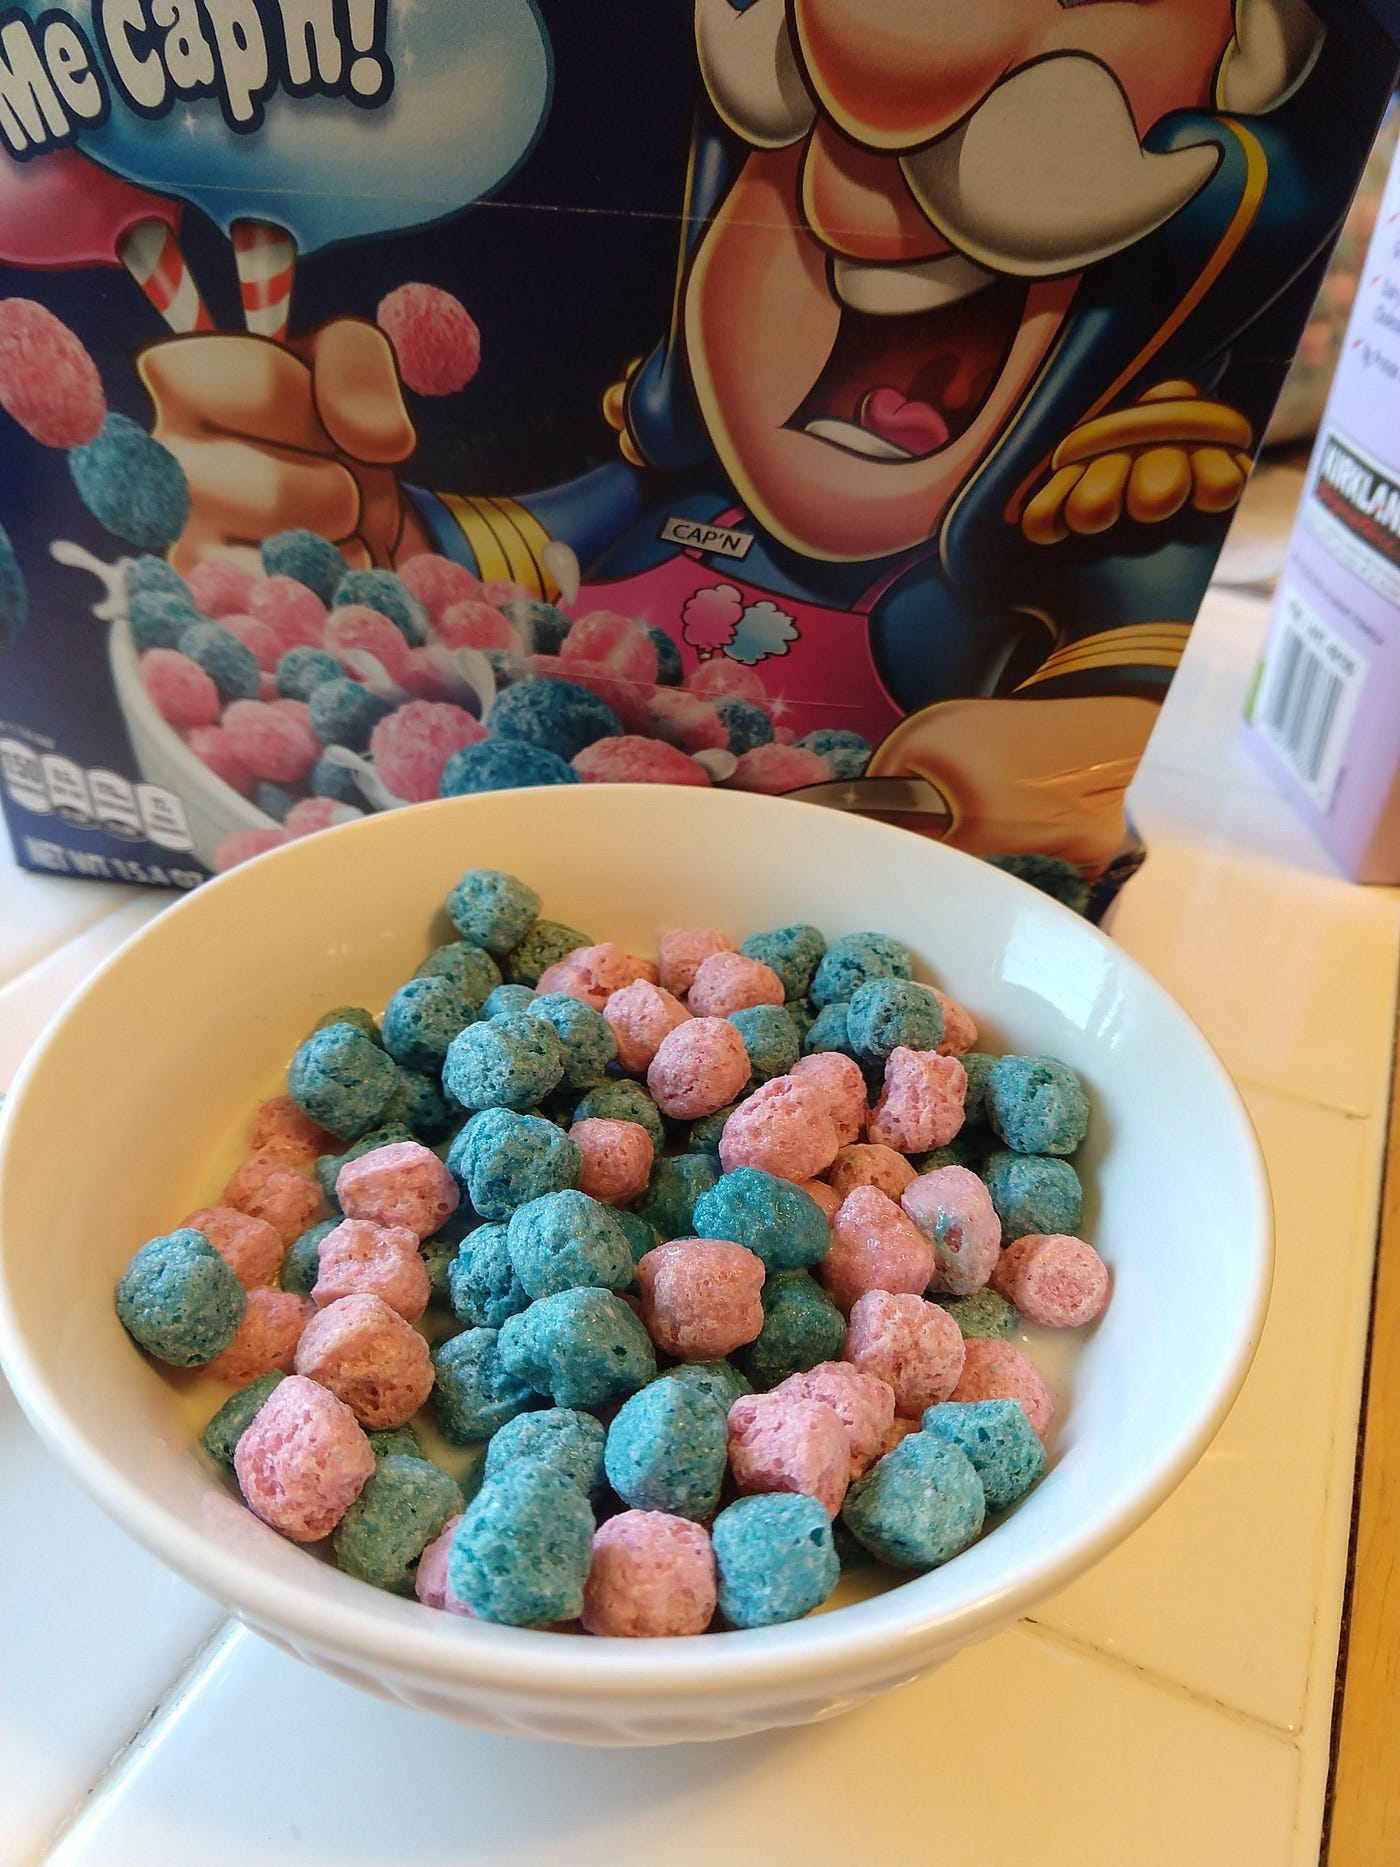 Snack Review: Captain Crunch's Cotton Candy Crunch Cereal | by Verity Aron  | Medium